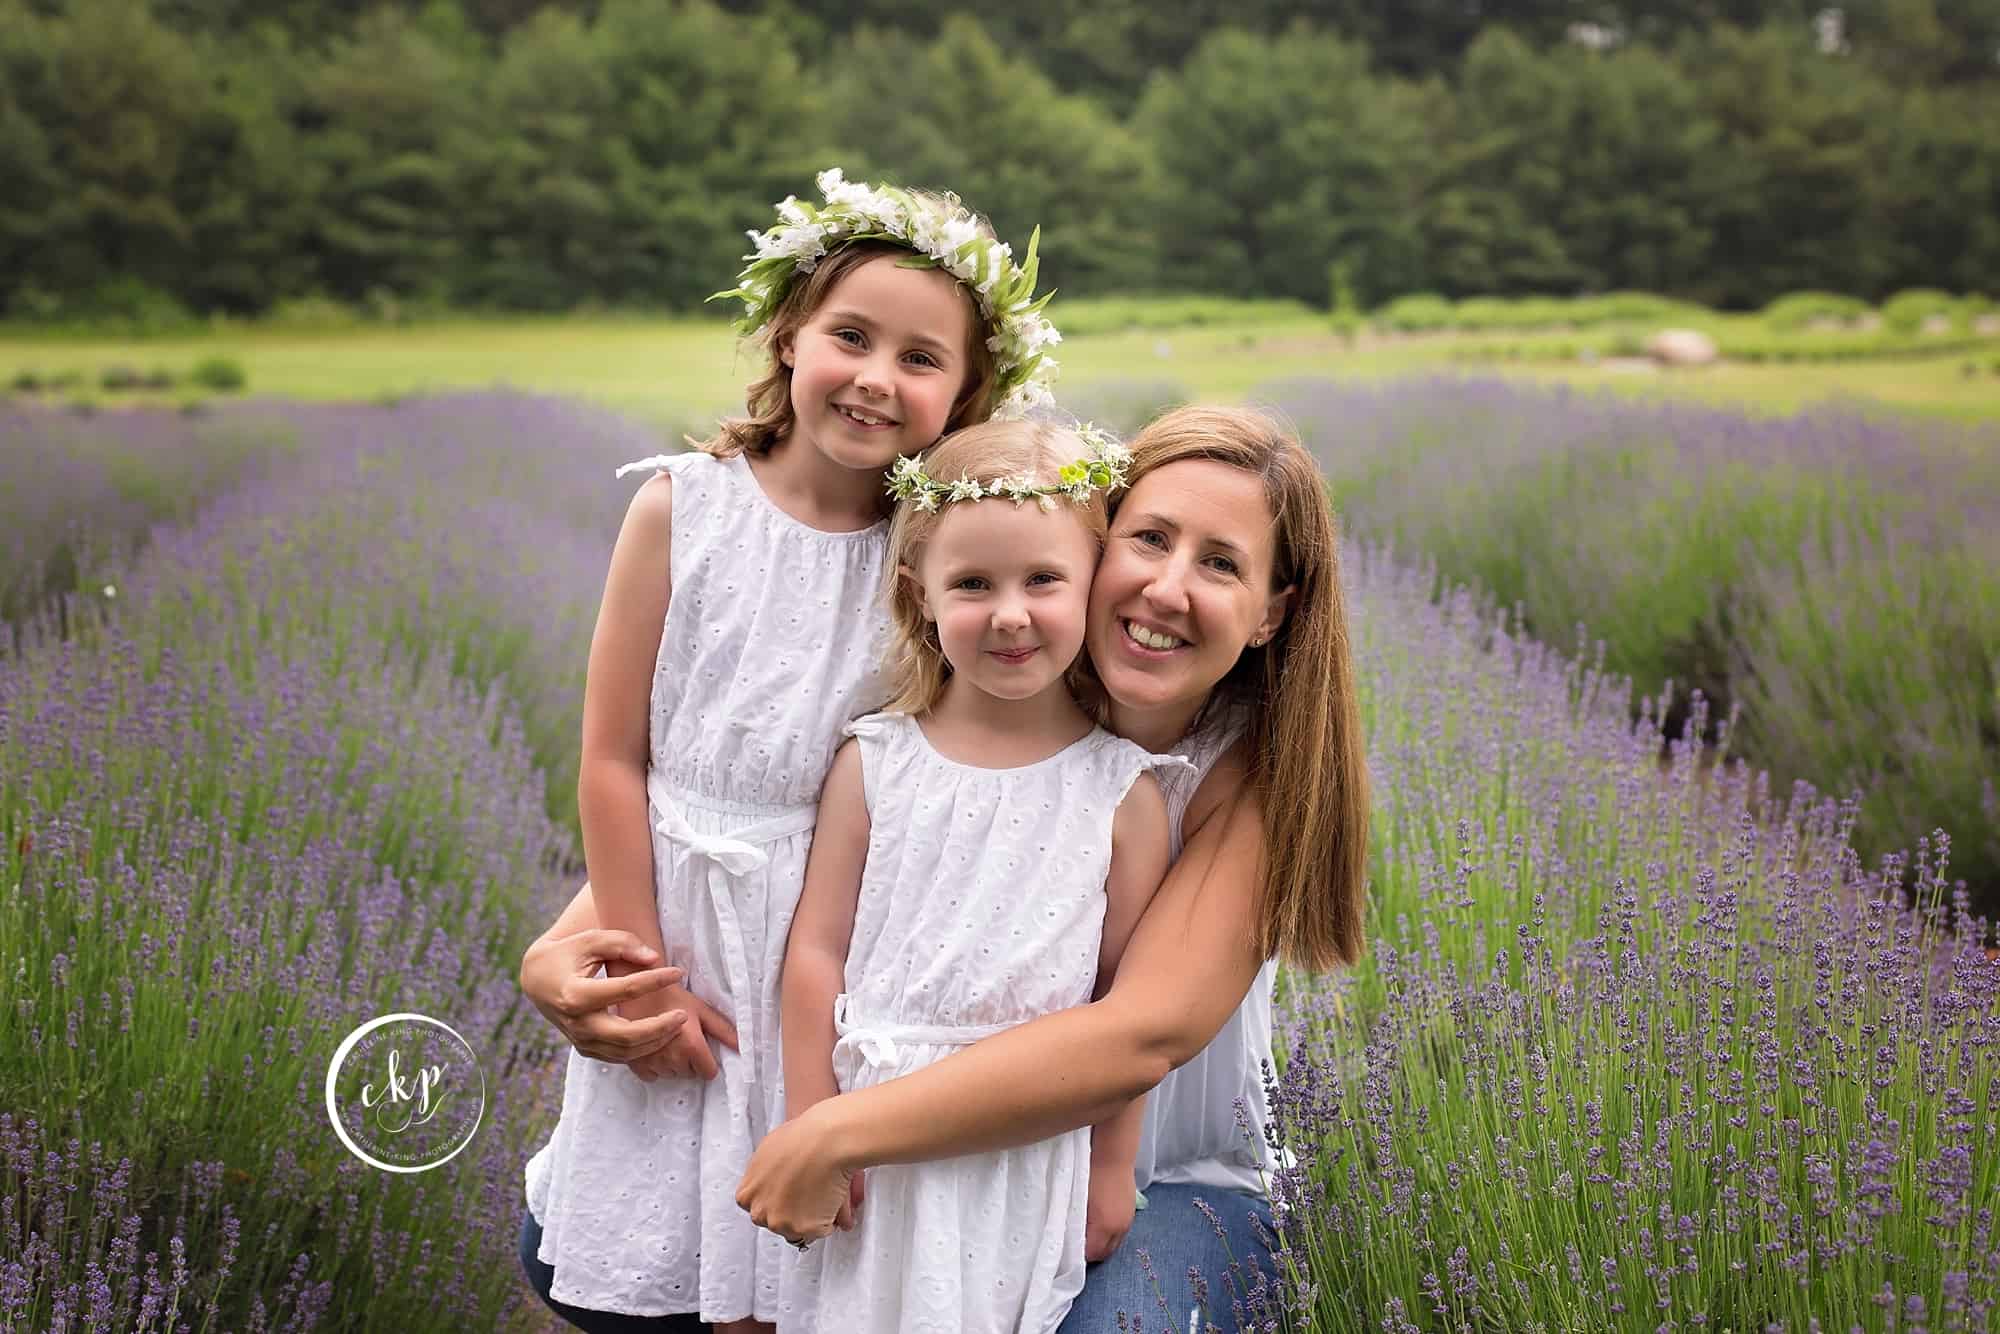 Lavender Family Photography in Kiliingworth CT with Catherine King Photography, a CT Family Photographer